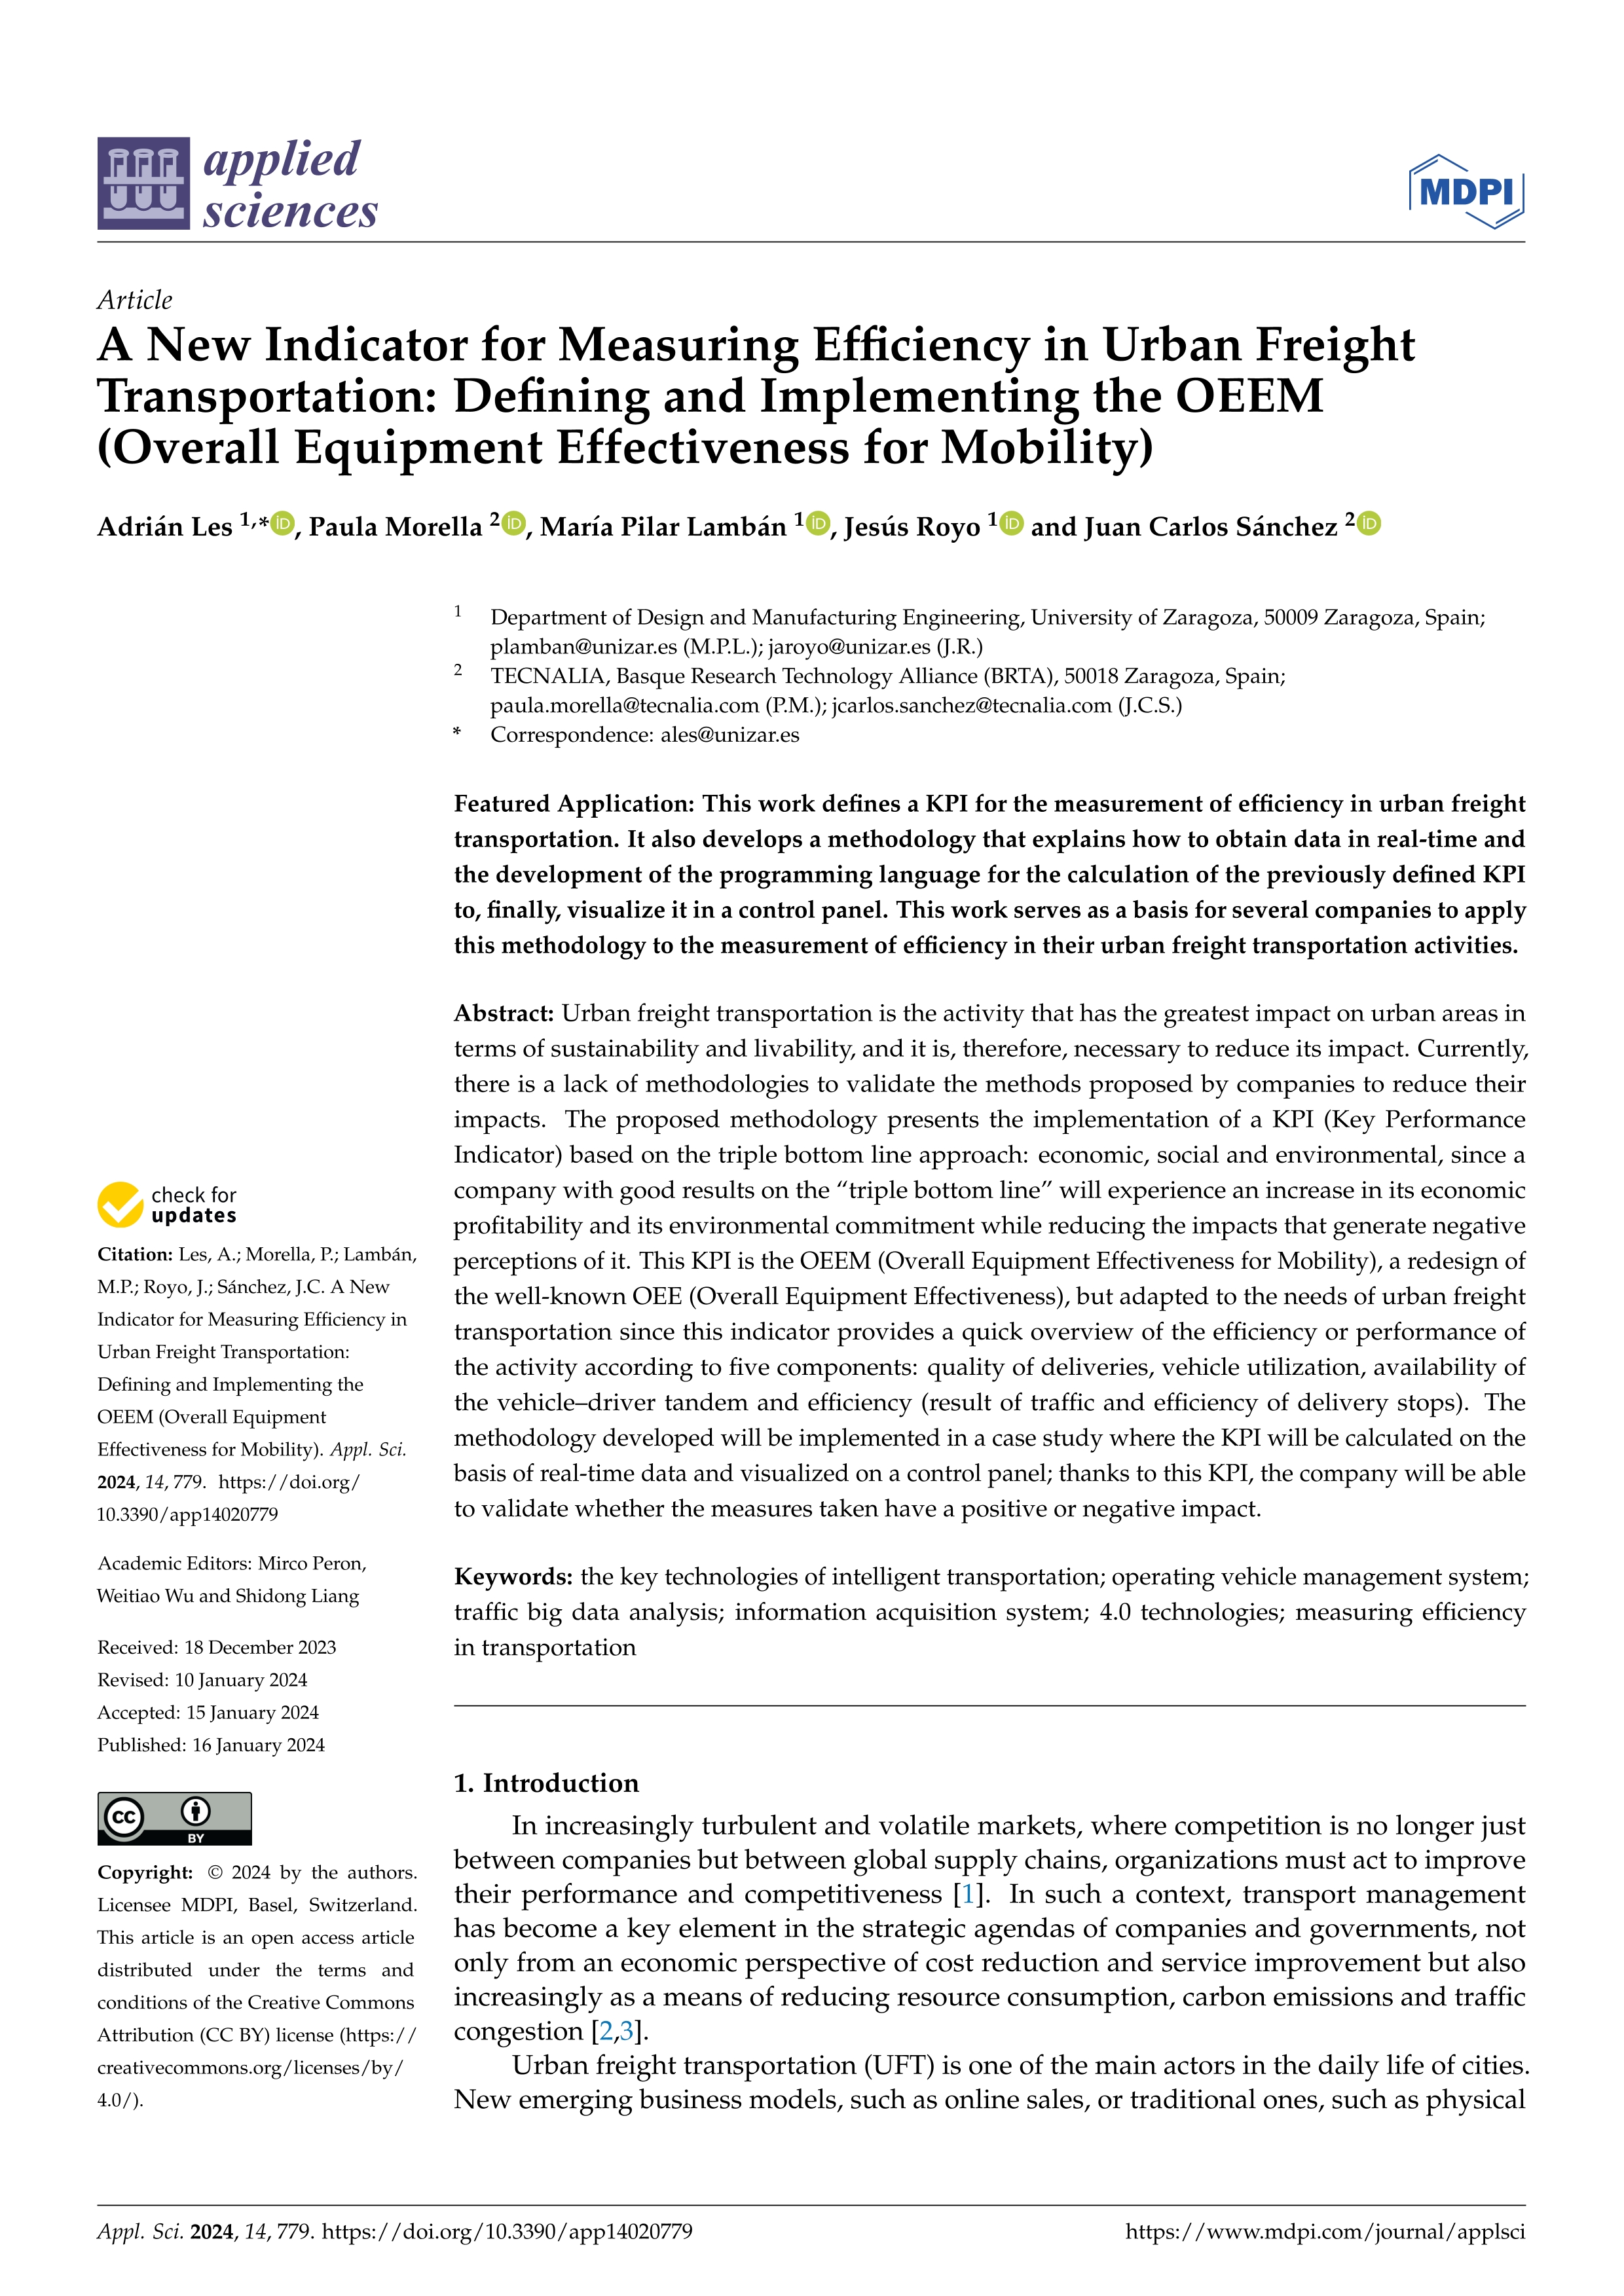 A new indicator for measuring efficiency in urban freight transportation: defining and implementing the OEEM (Overall Equipment Effectiveness for Mobility)